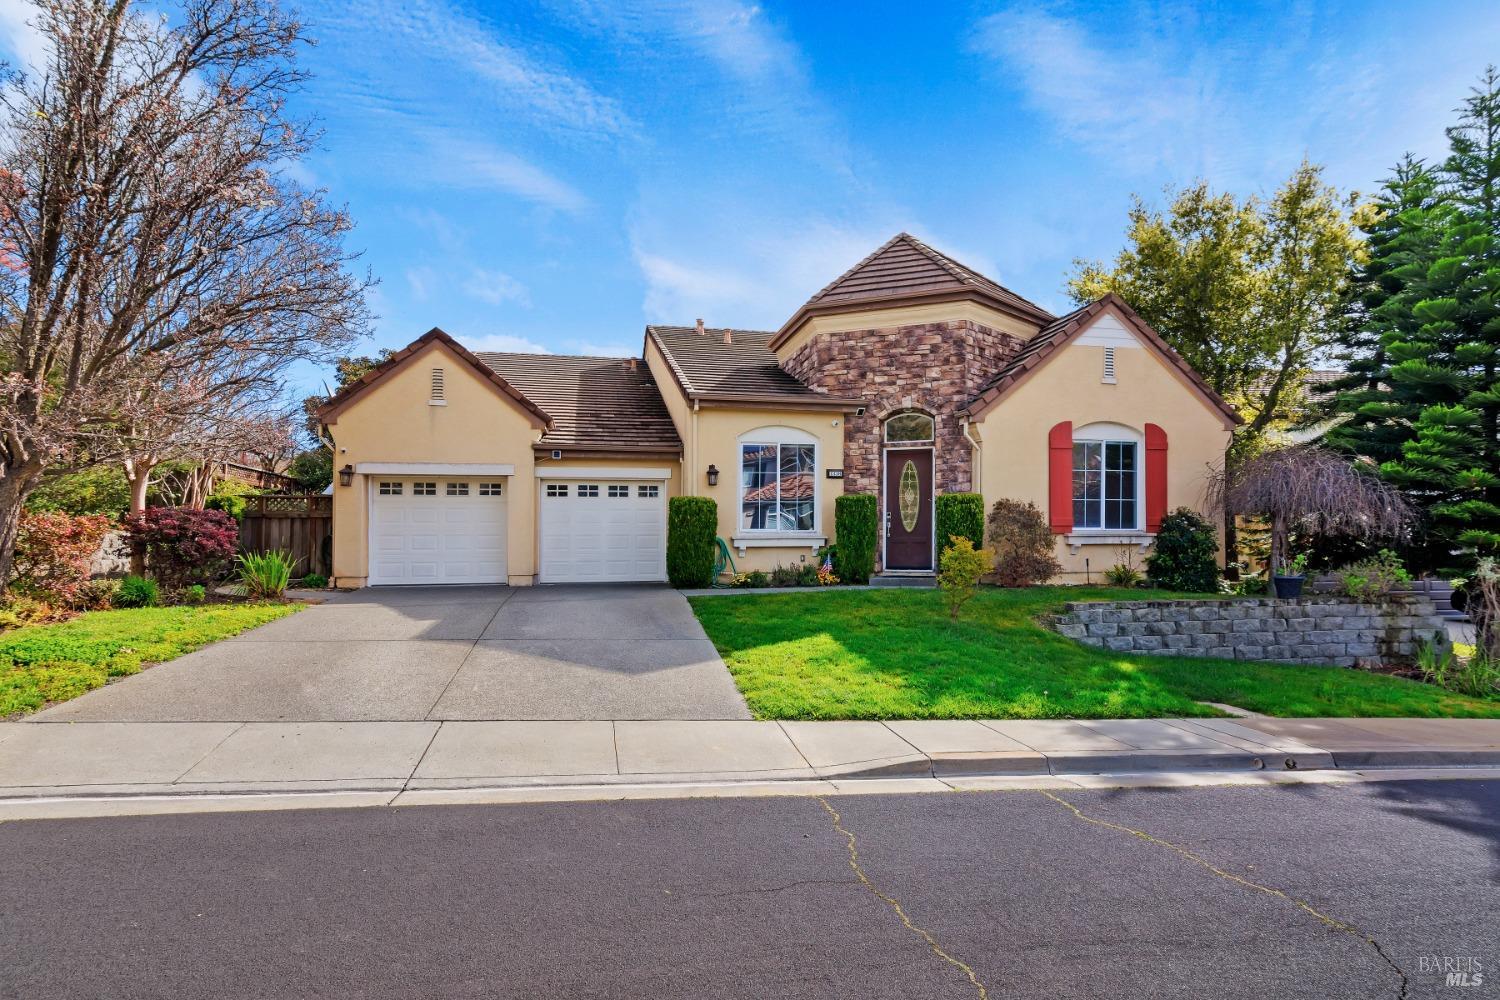 Photo of 1338 Swainson Ct in Vallejo, CA